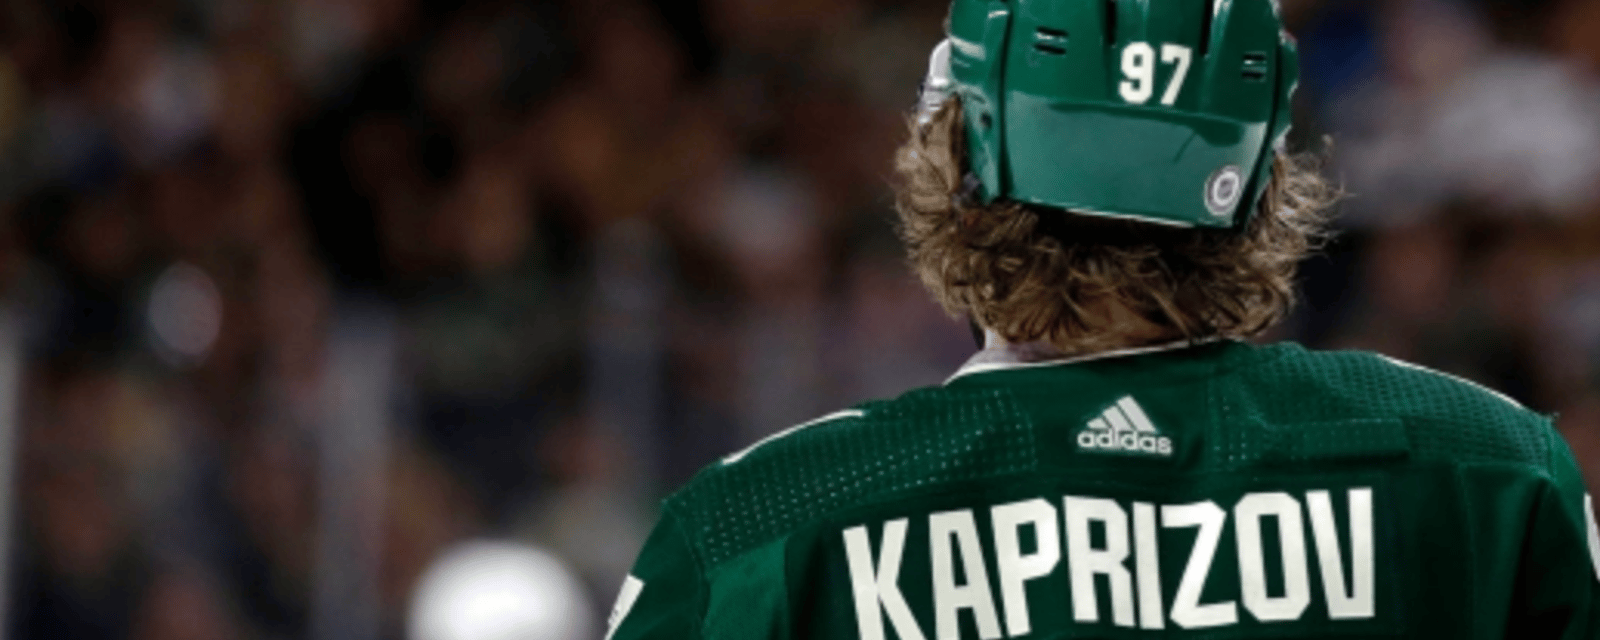 Kirill Kaprizov included in “most disappointing” '23 postseason performers 